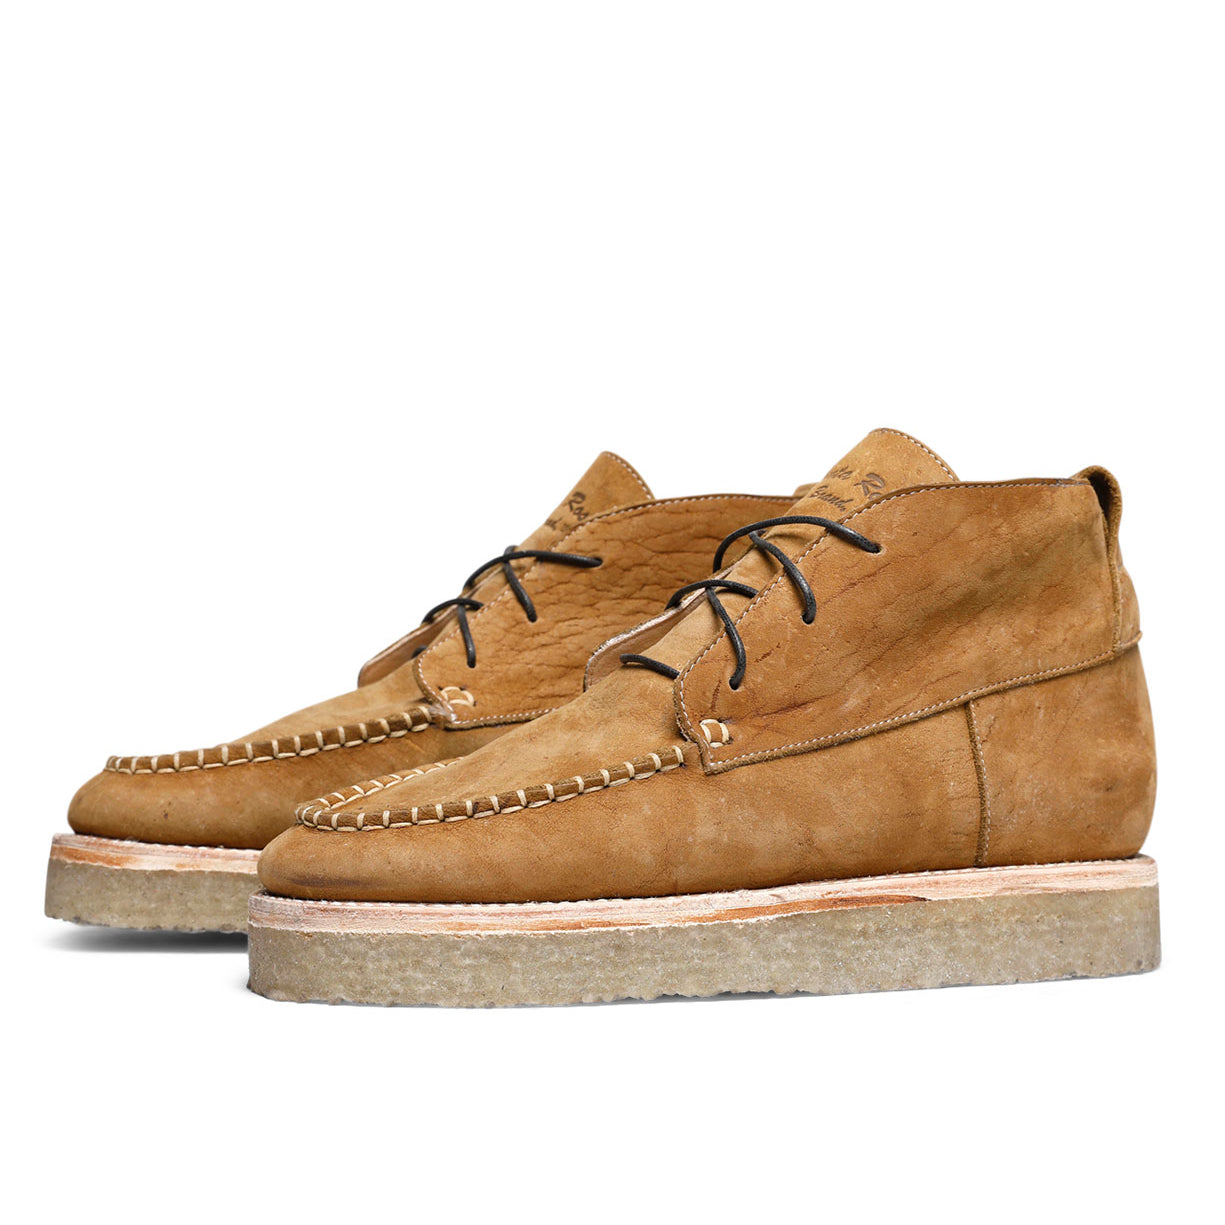 A comfortable, tan suede Tahoma Moccasin shoe with a lace out from the Santa Rosa Brand.